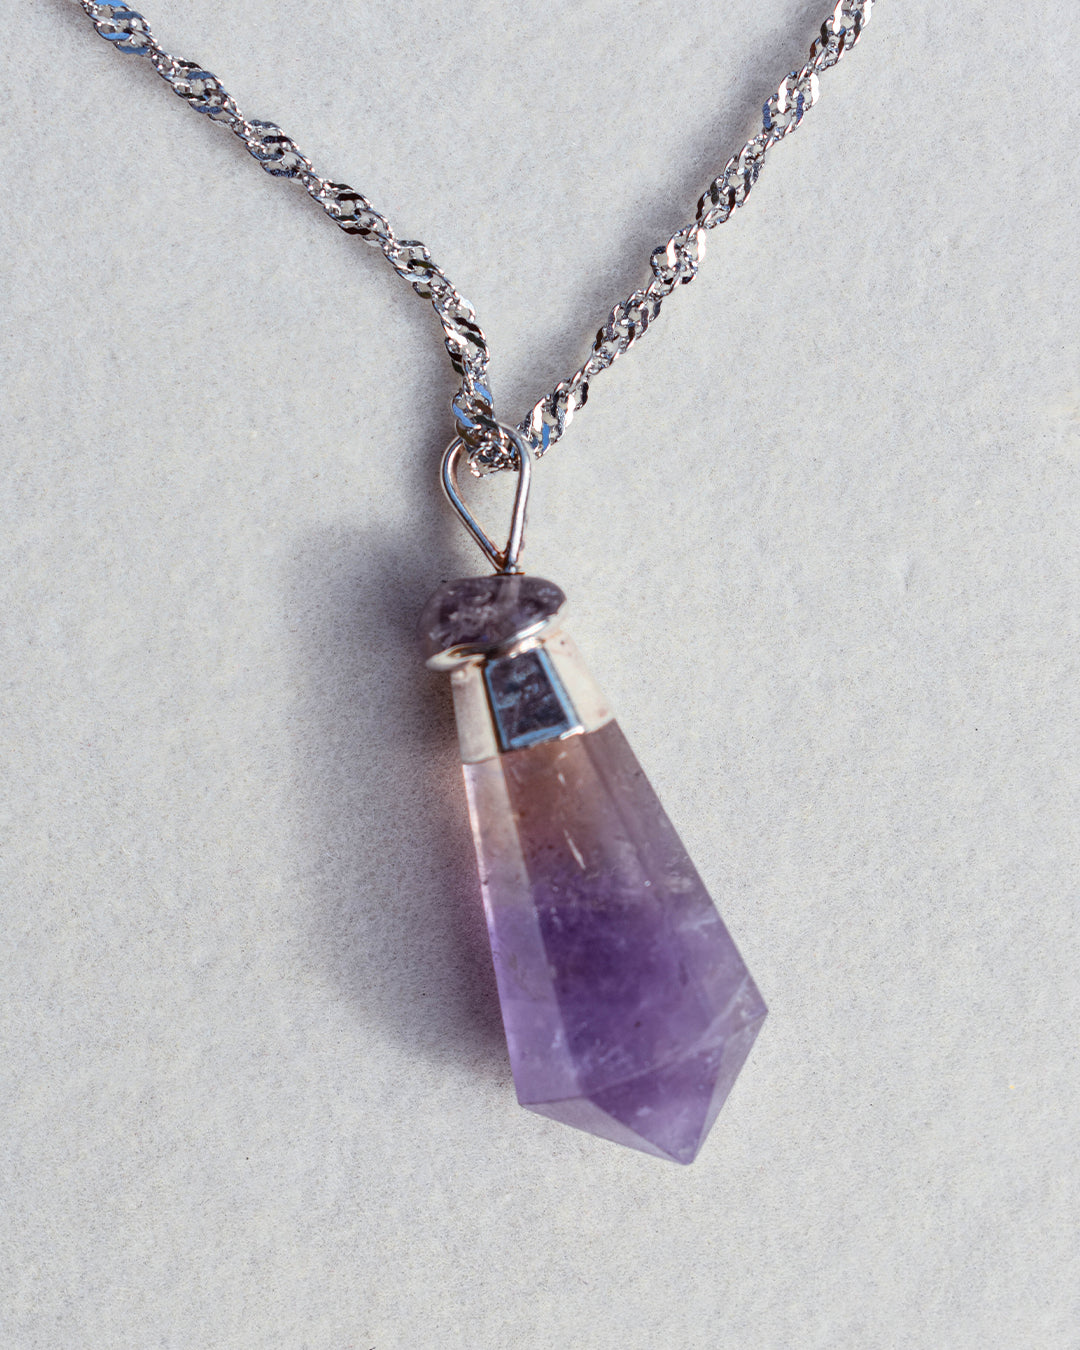 Stainless Steel chain with Amethyst crystal pendant